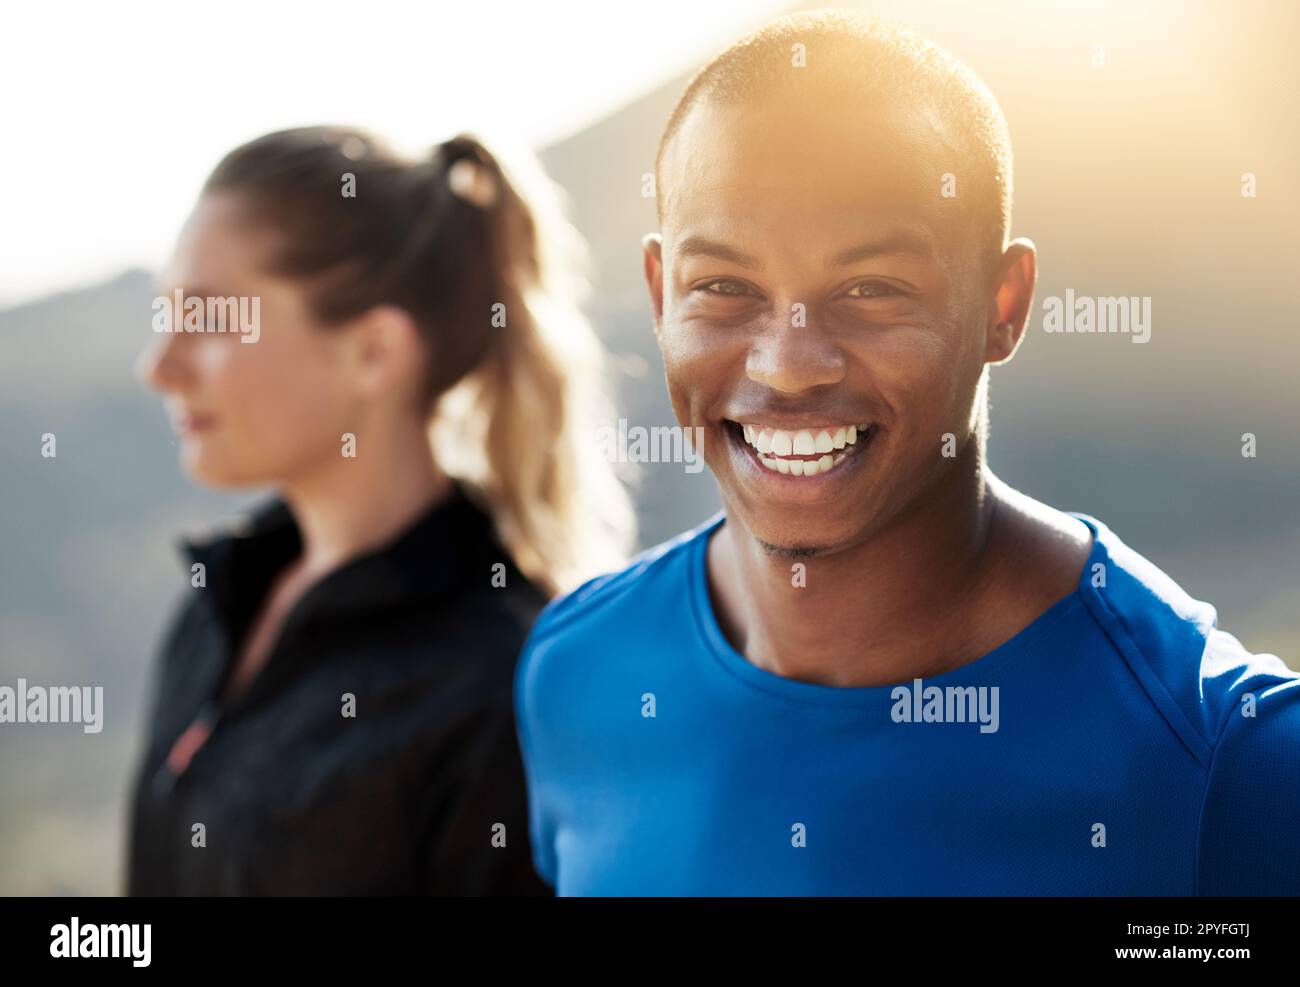 If you can walk, you can run. two athletes standing outdoors. Stock Photo